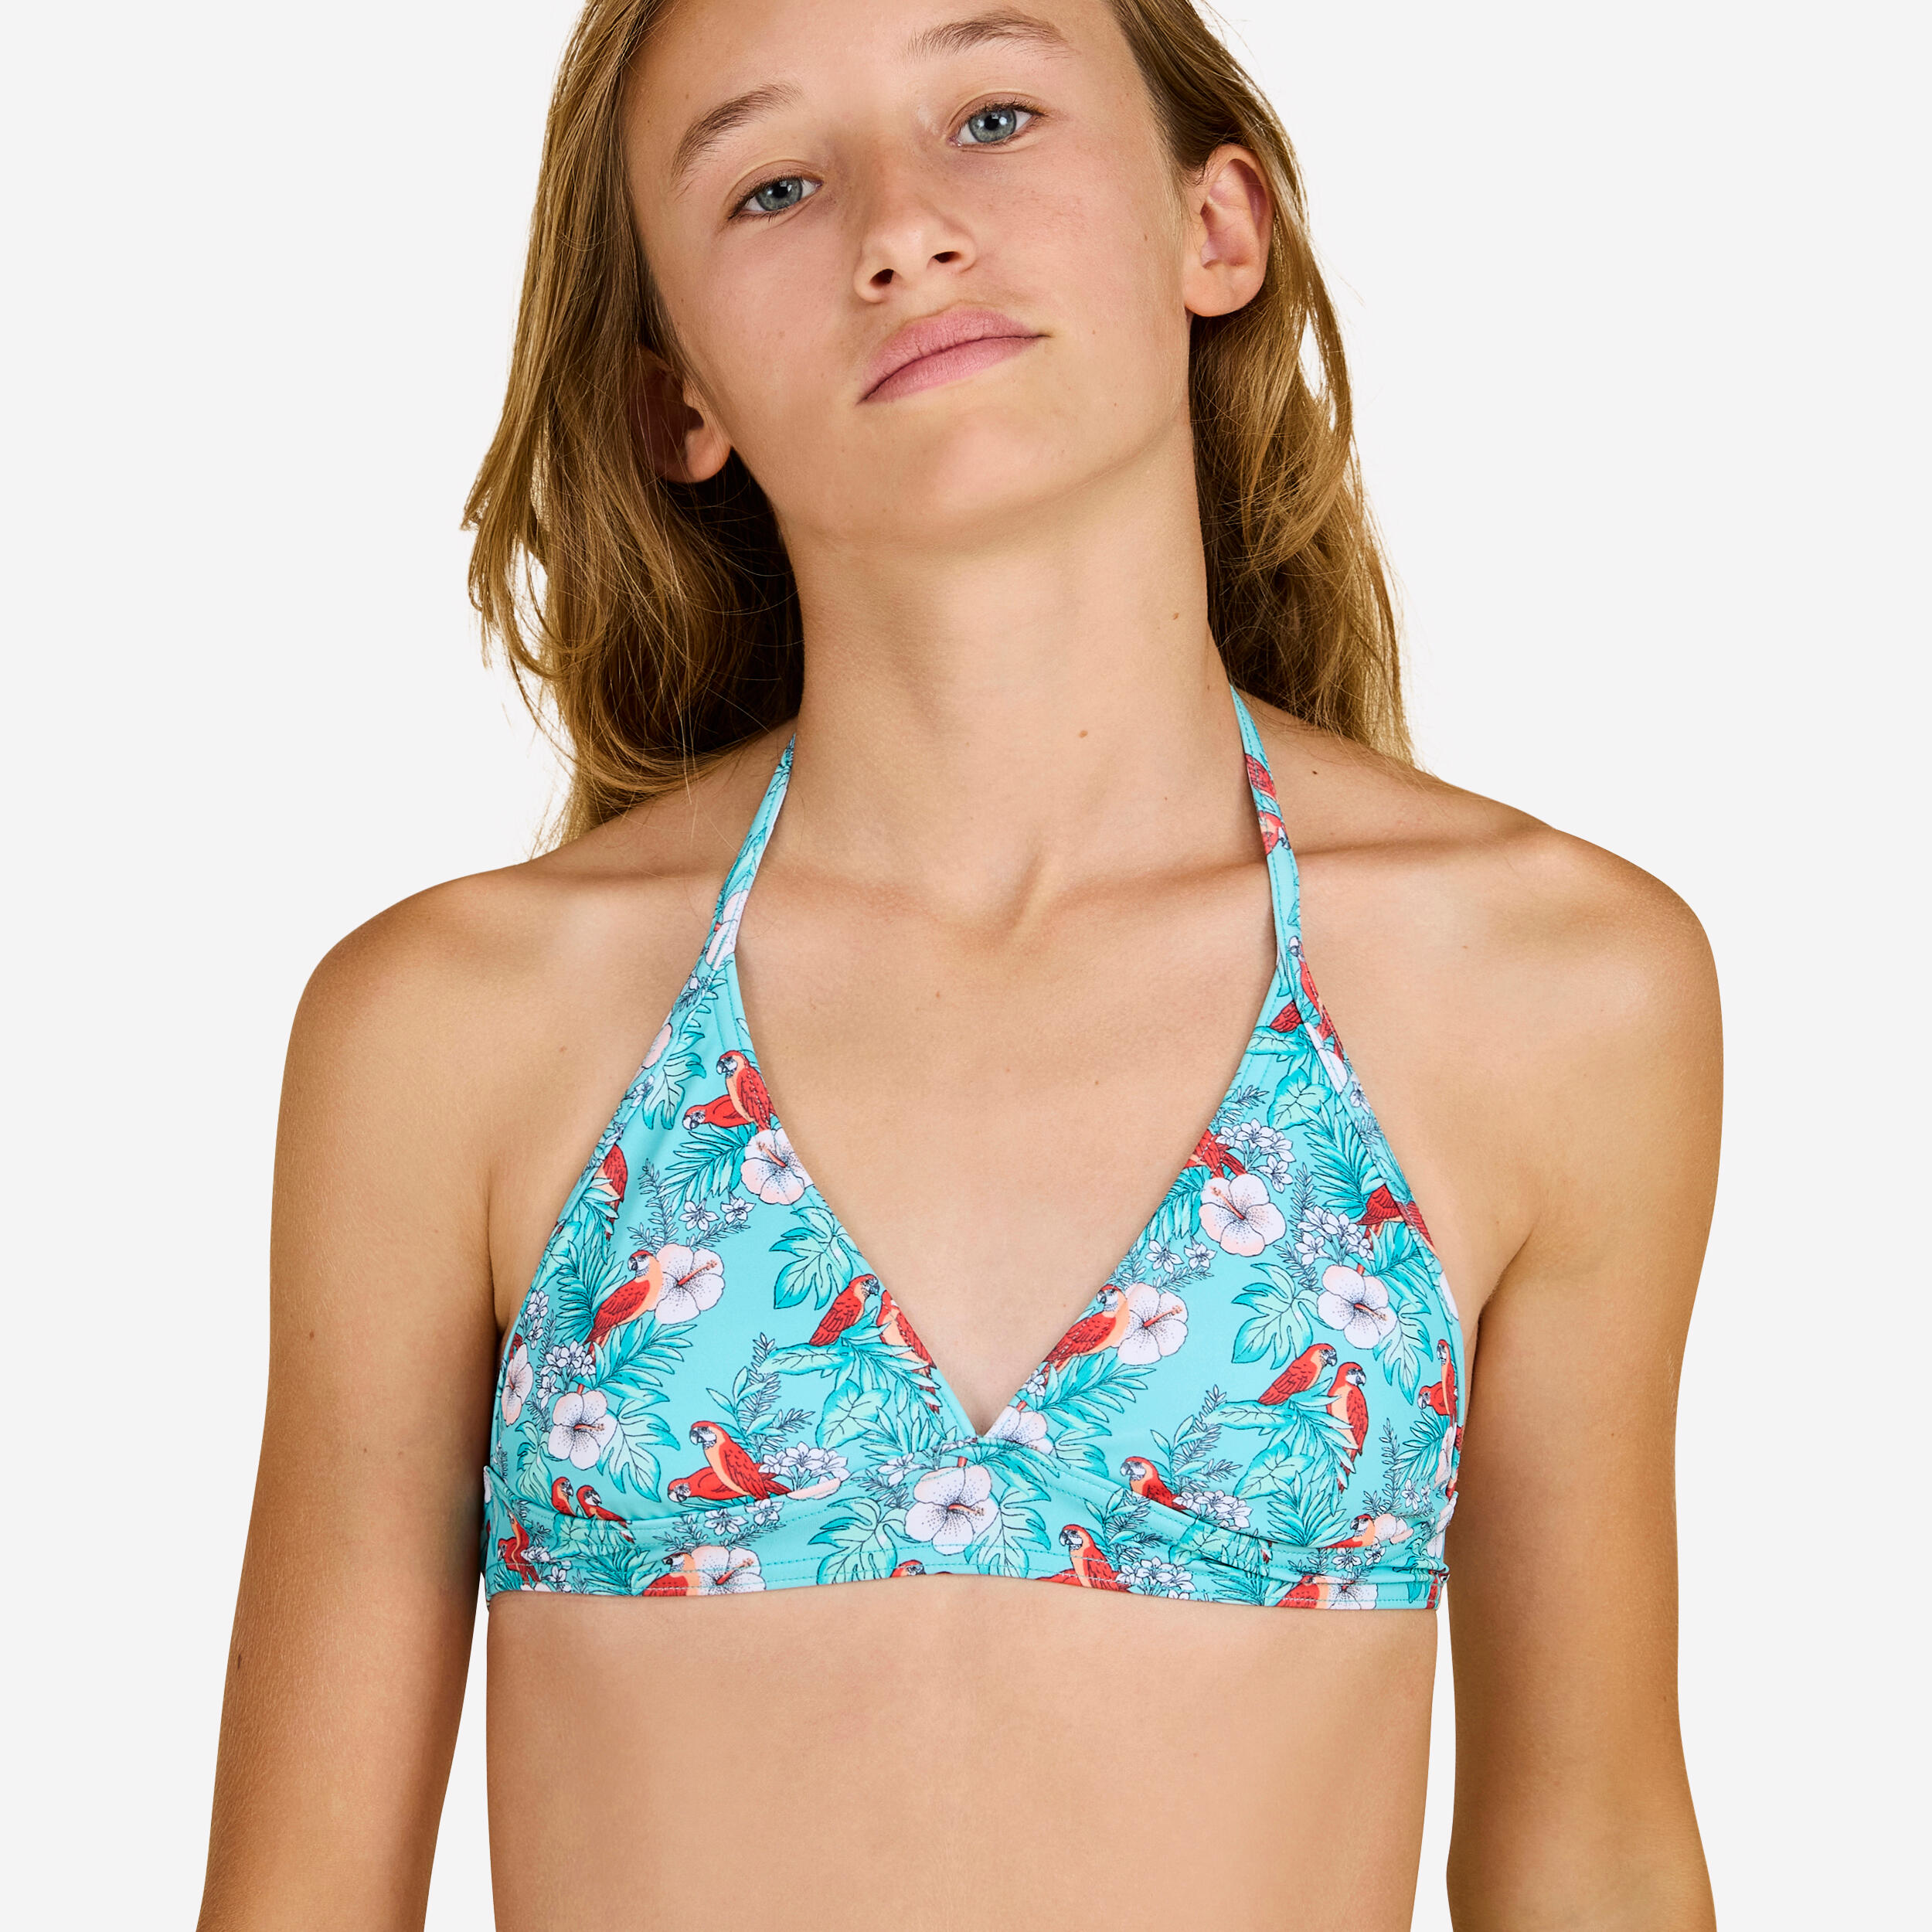 OLAIAN GIRL'S HALTER NECK SWIMSUIT 100 COCO TURQUOISE